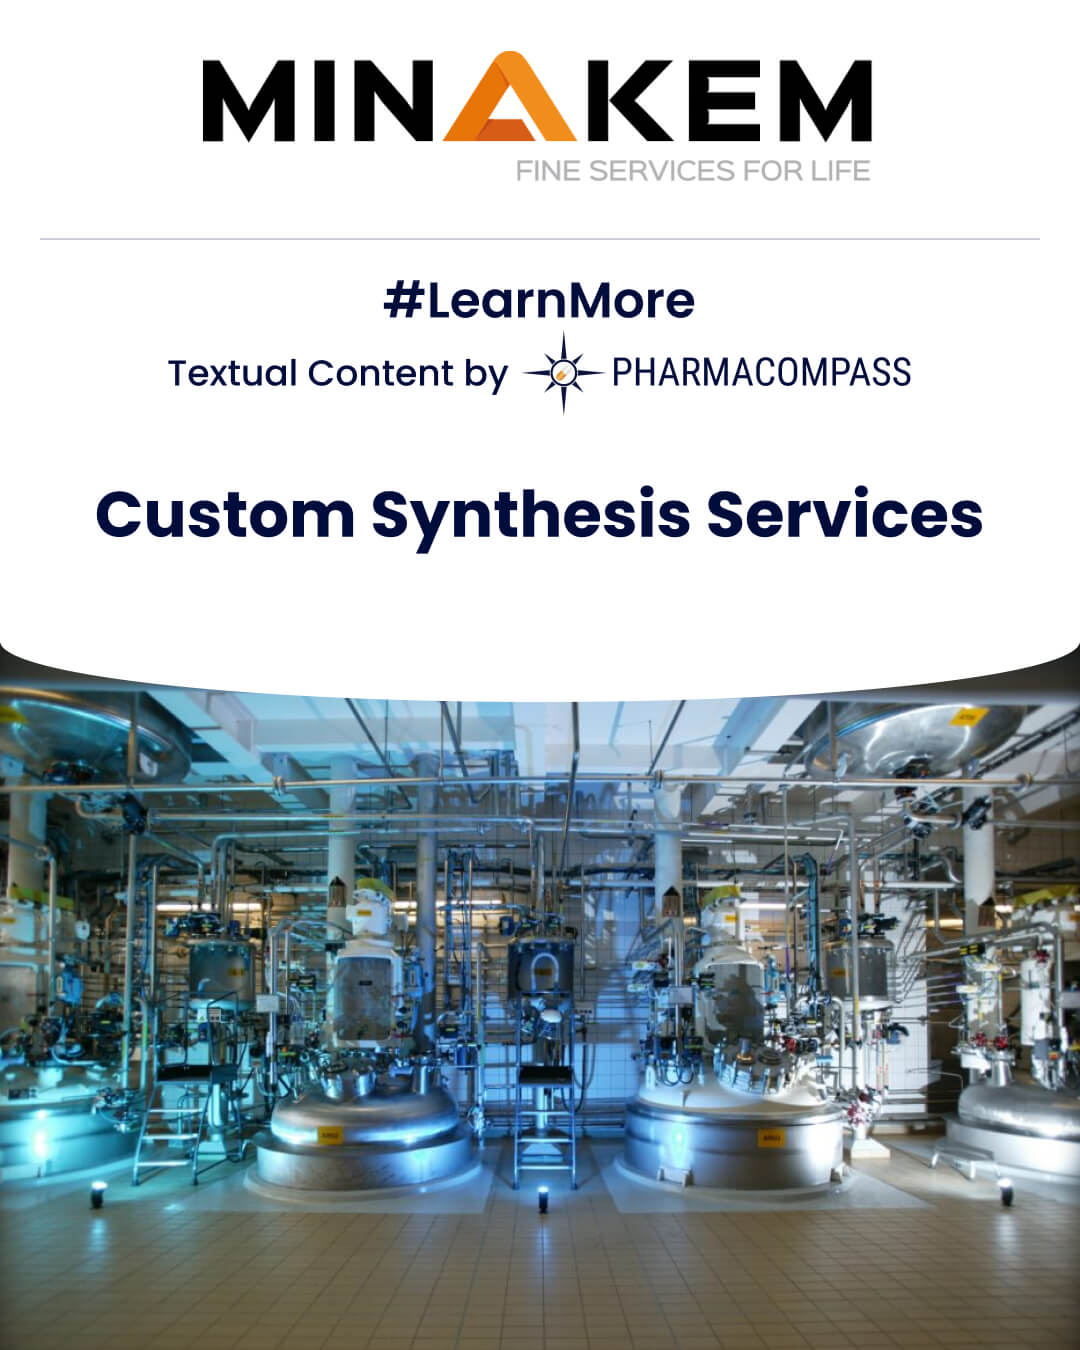 Looking for API custom synthesis services? Find Minakem, a CDMO offering custom APIs, intermediates, fine chemicals, HPAPIs, etc. on PharmaCompass.